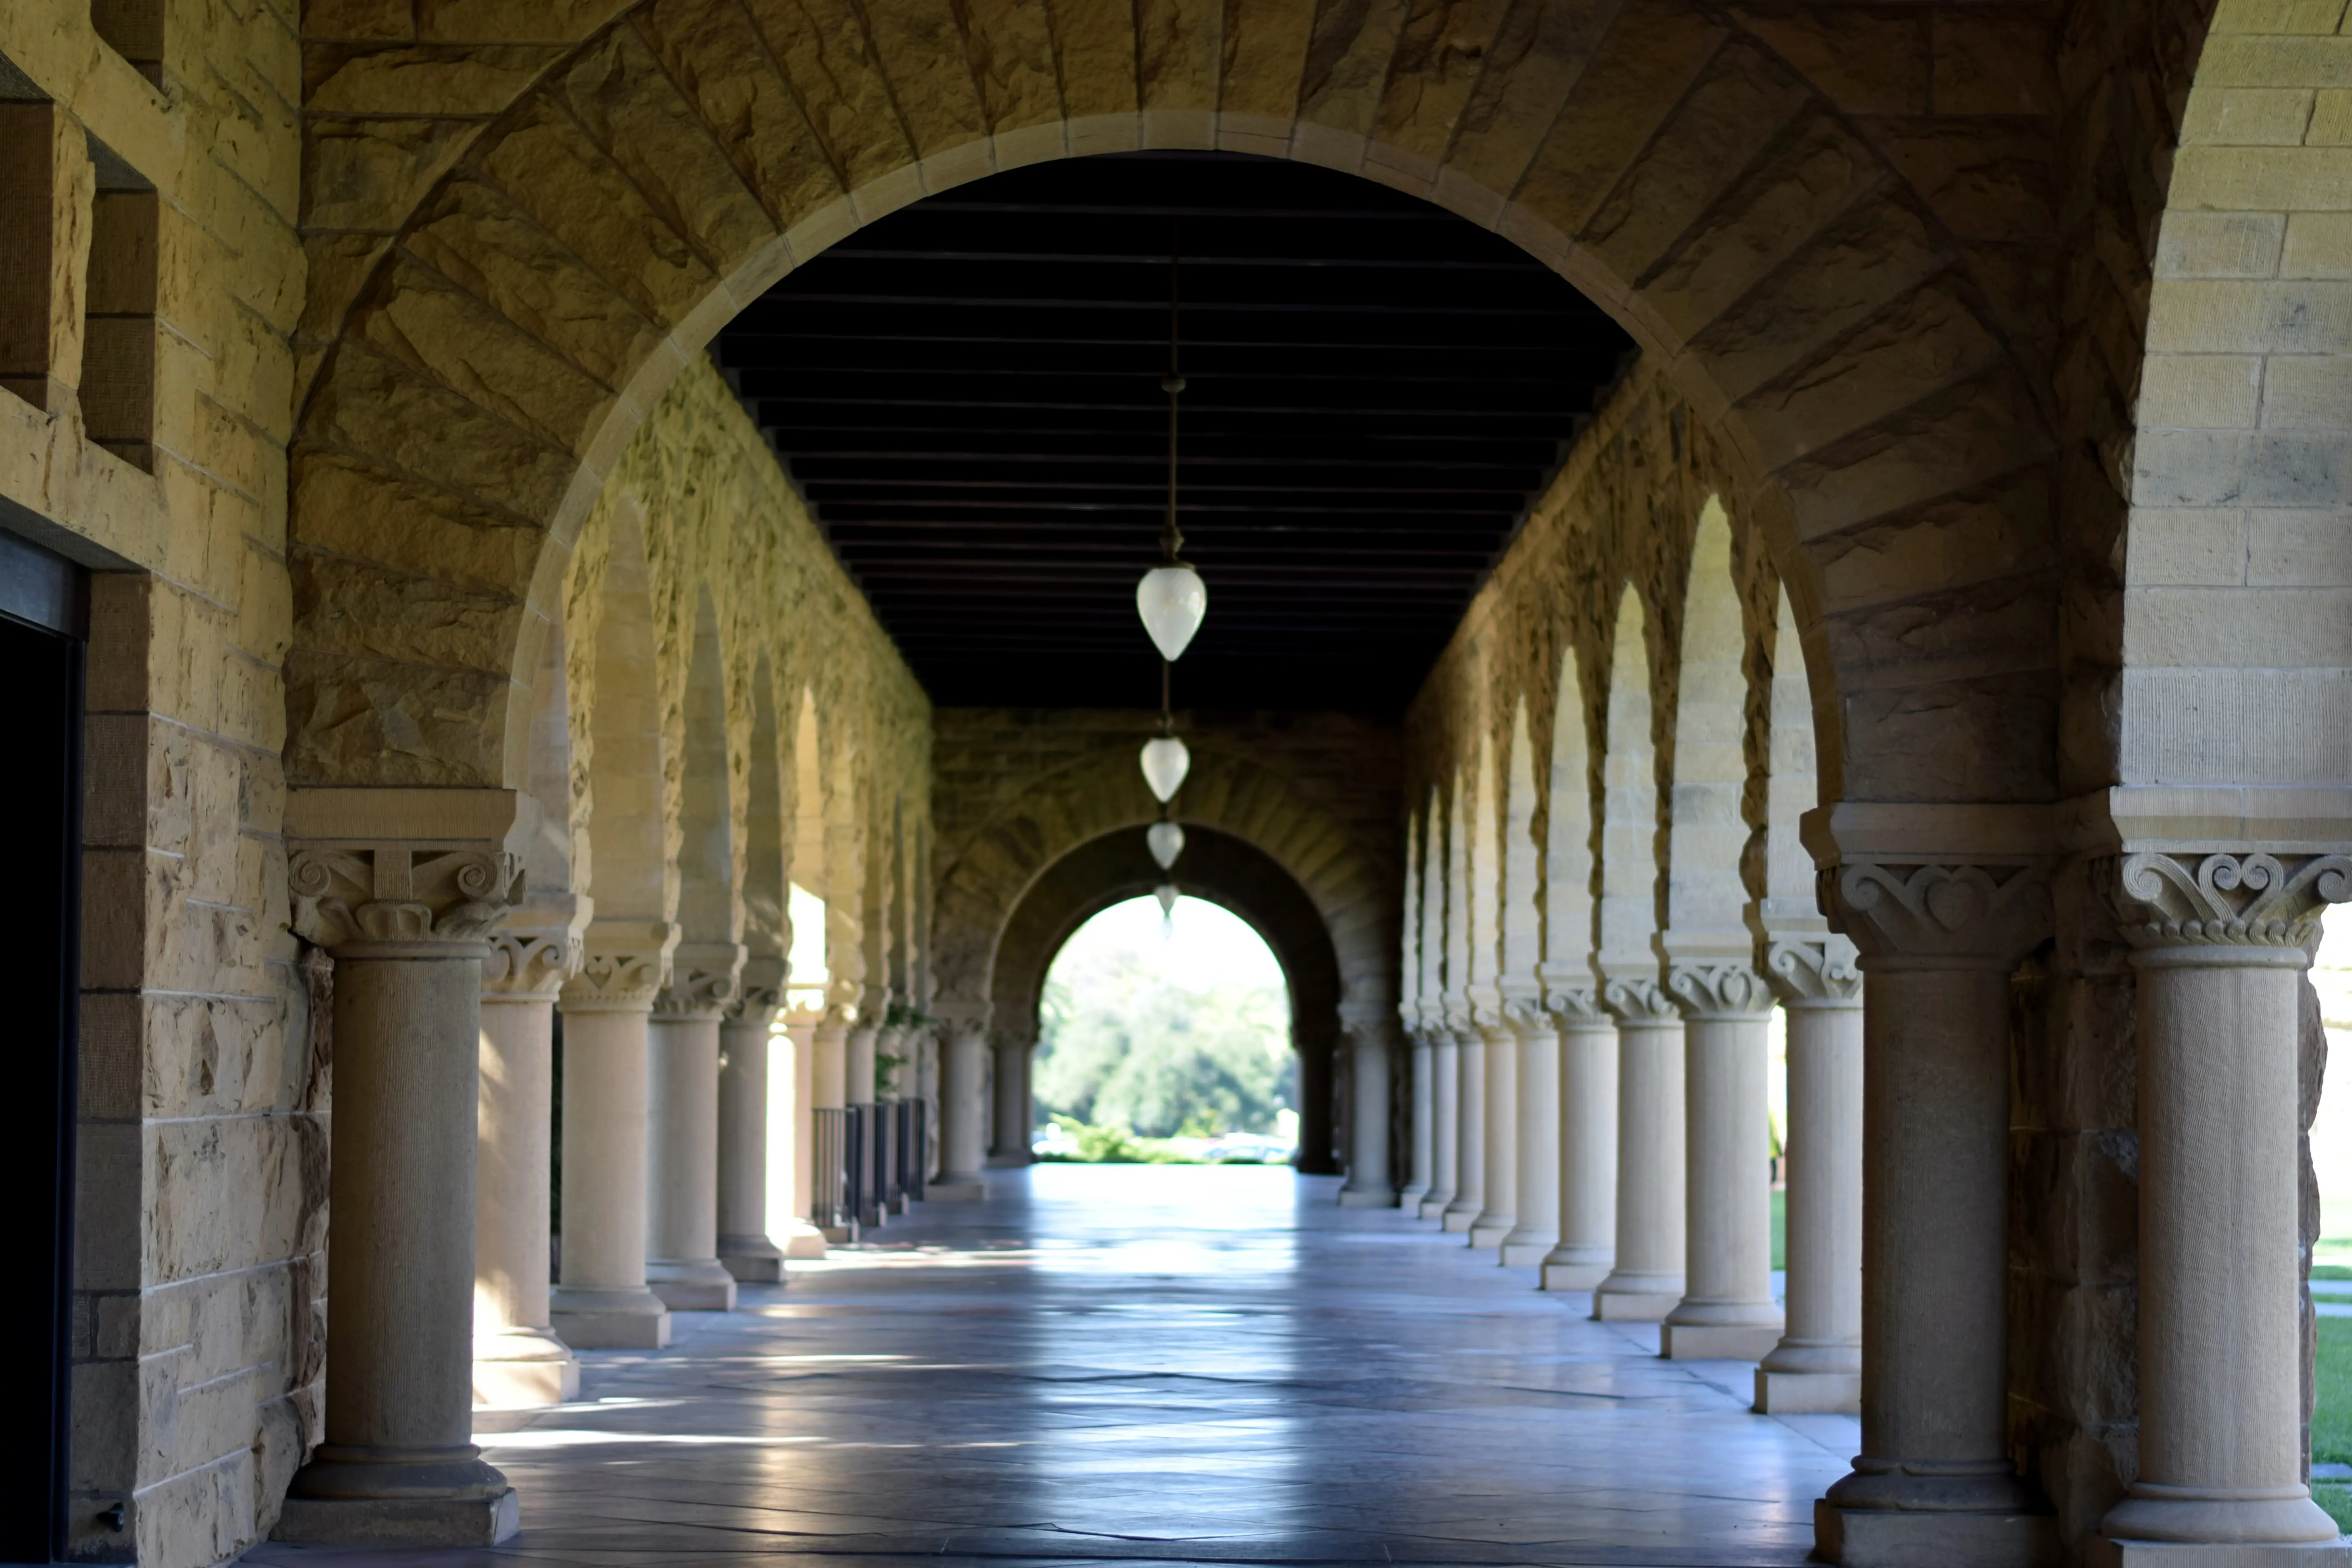 Russell Furr discusses Stanford campus safety in the face of COVID-19